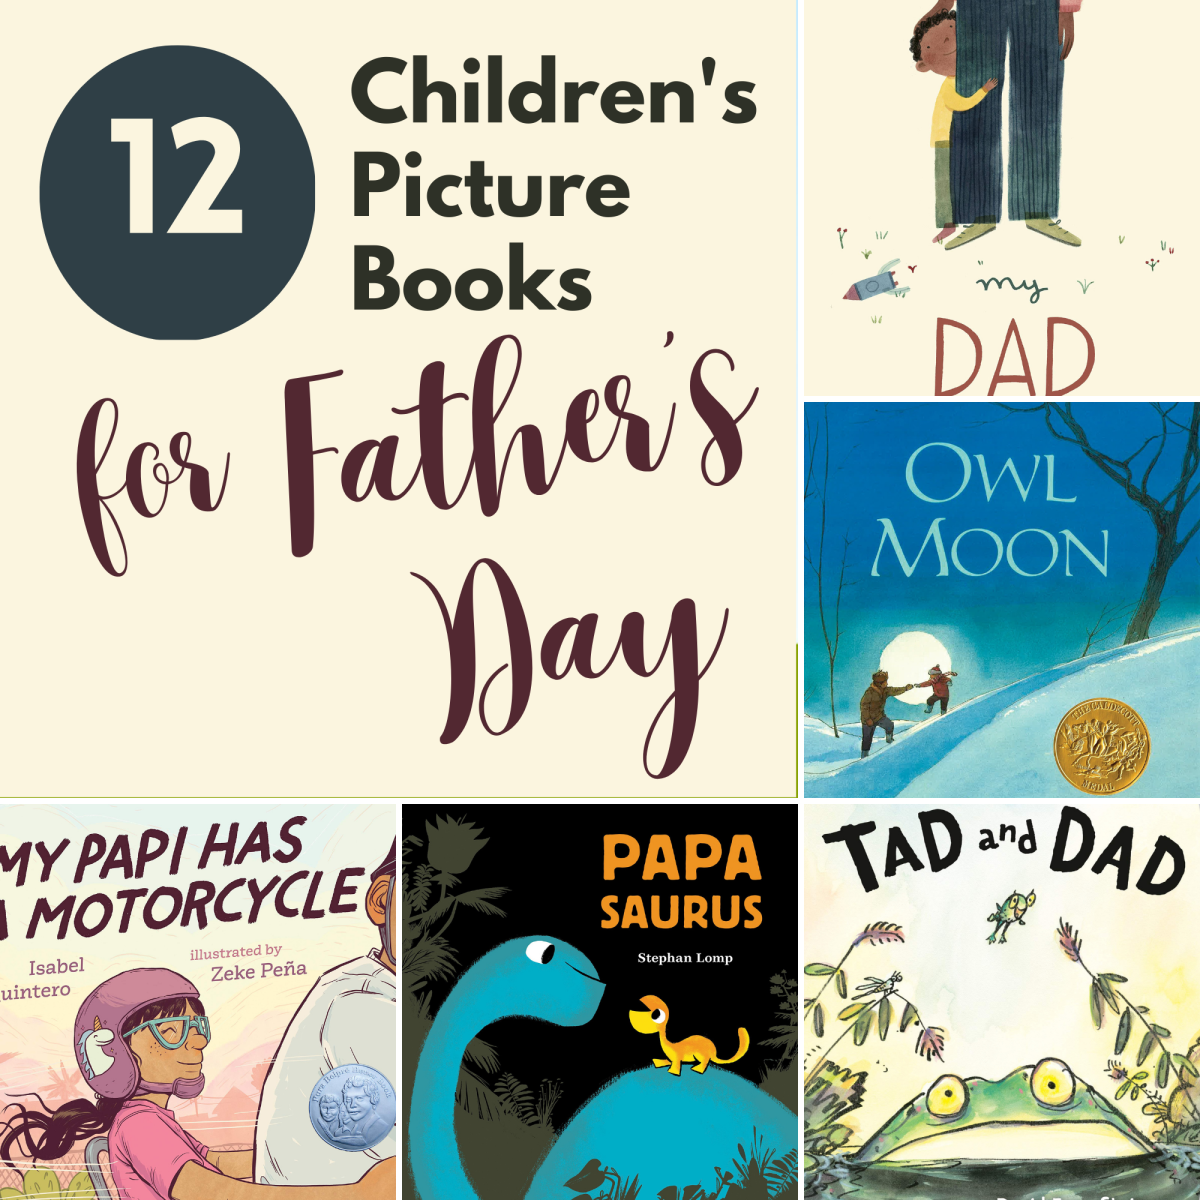 12 Children's Picture Books About Dads for Father's Day